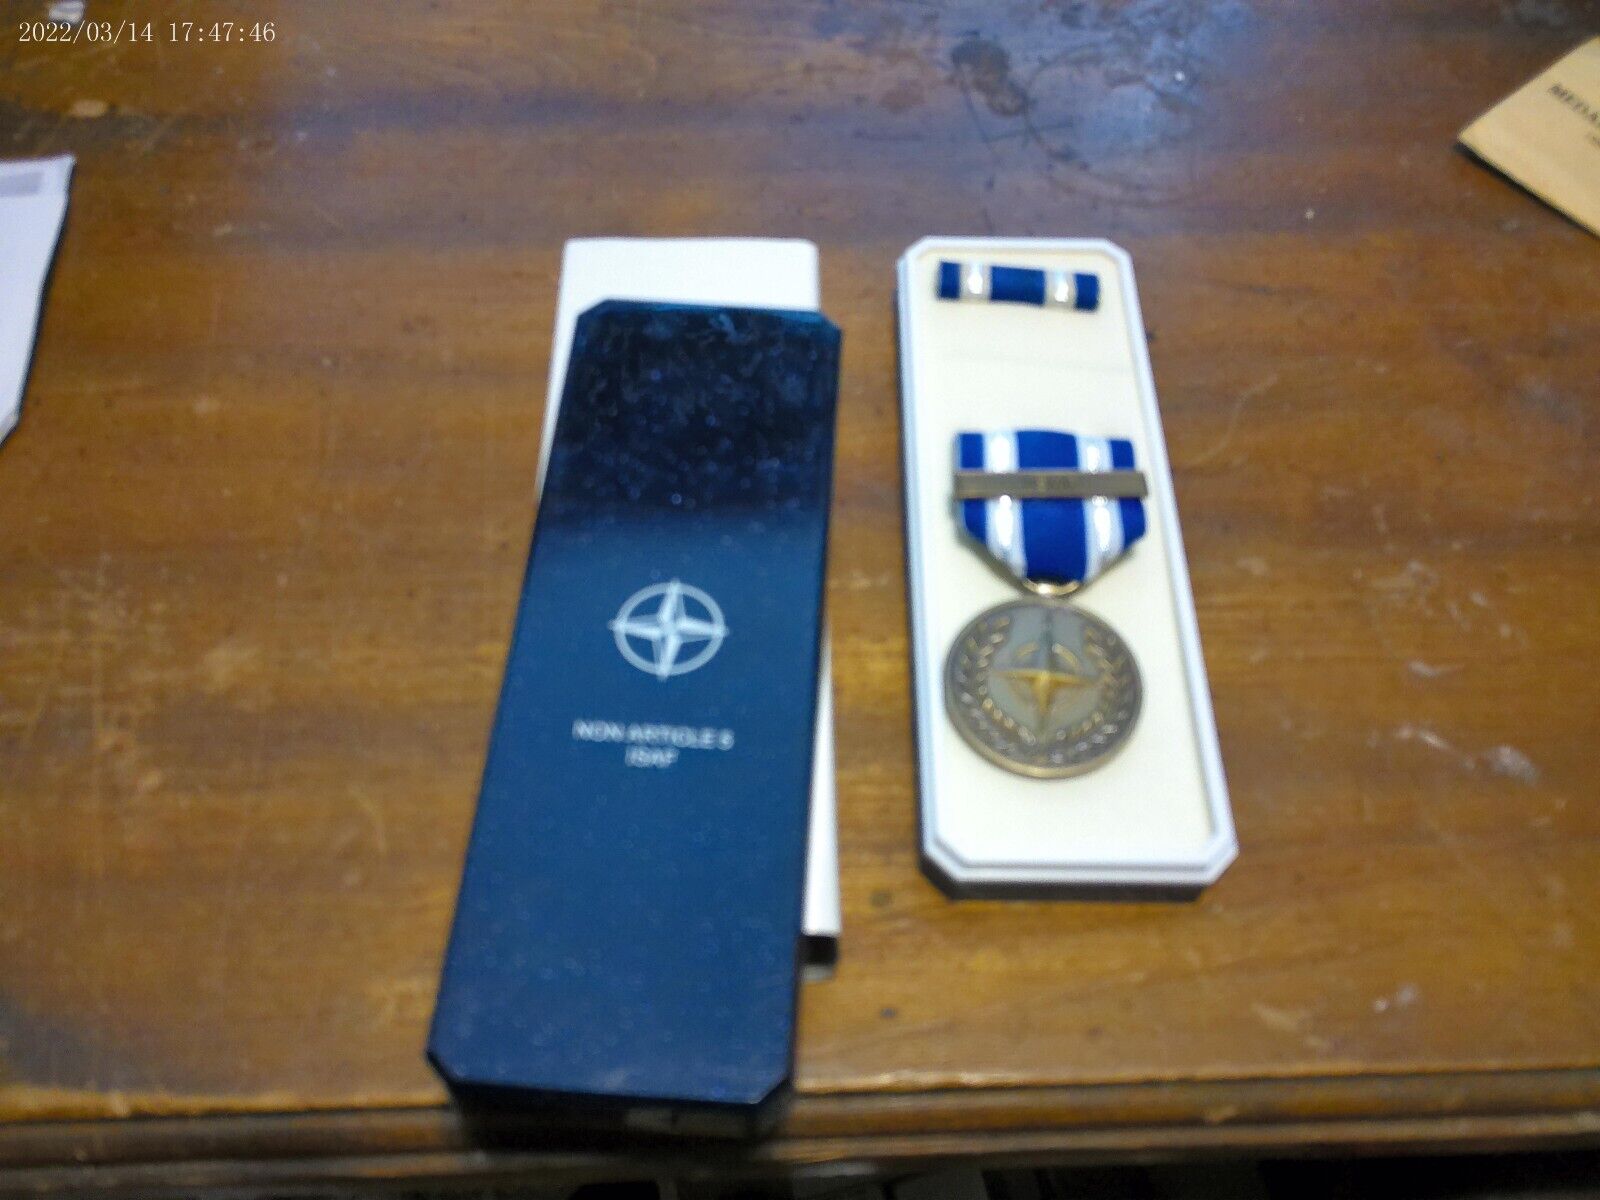 NATO MILITARY ISAF Afghanistan War Service PEACE Medal Cased Non Article 5 AWARD